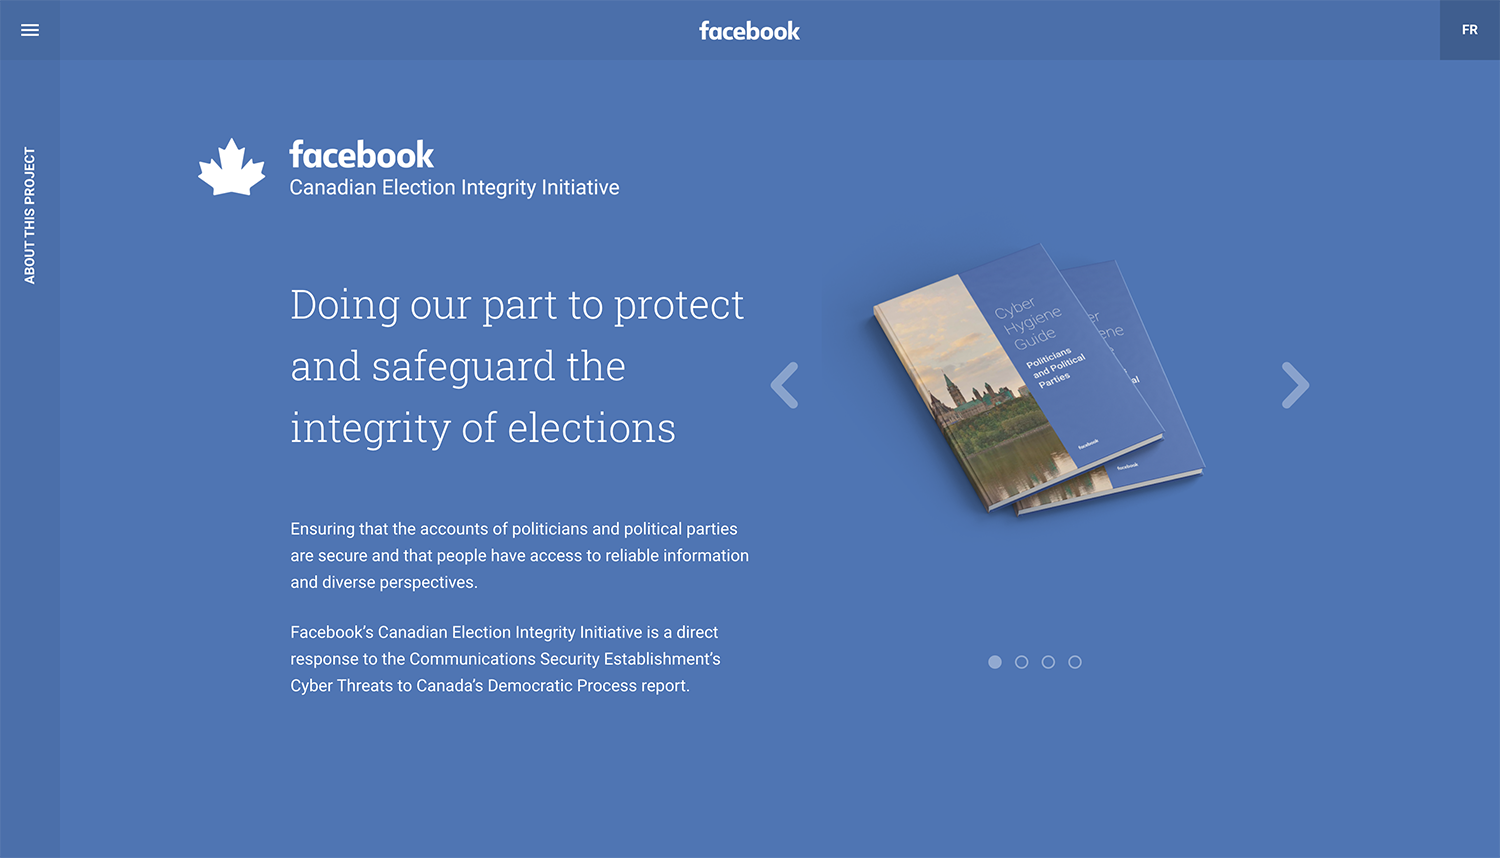 Facebook Canadian Election Integrity